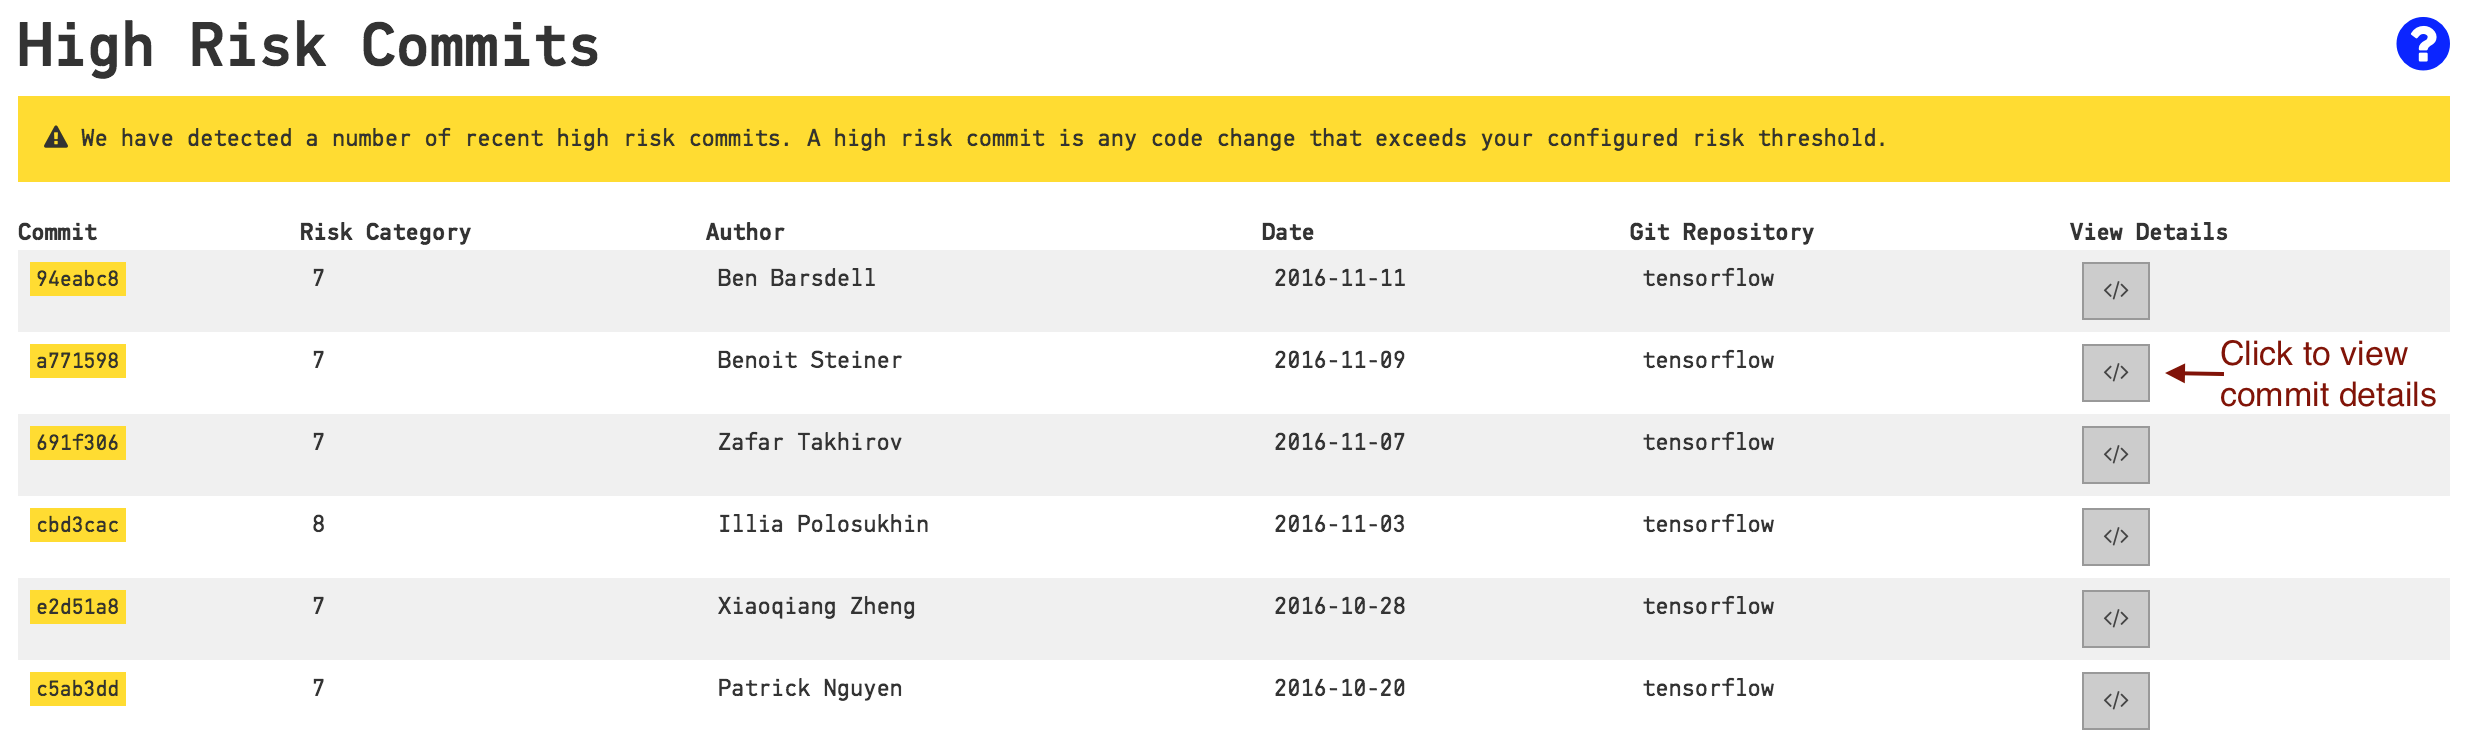 Details on higg risk commits